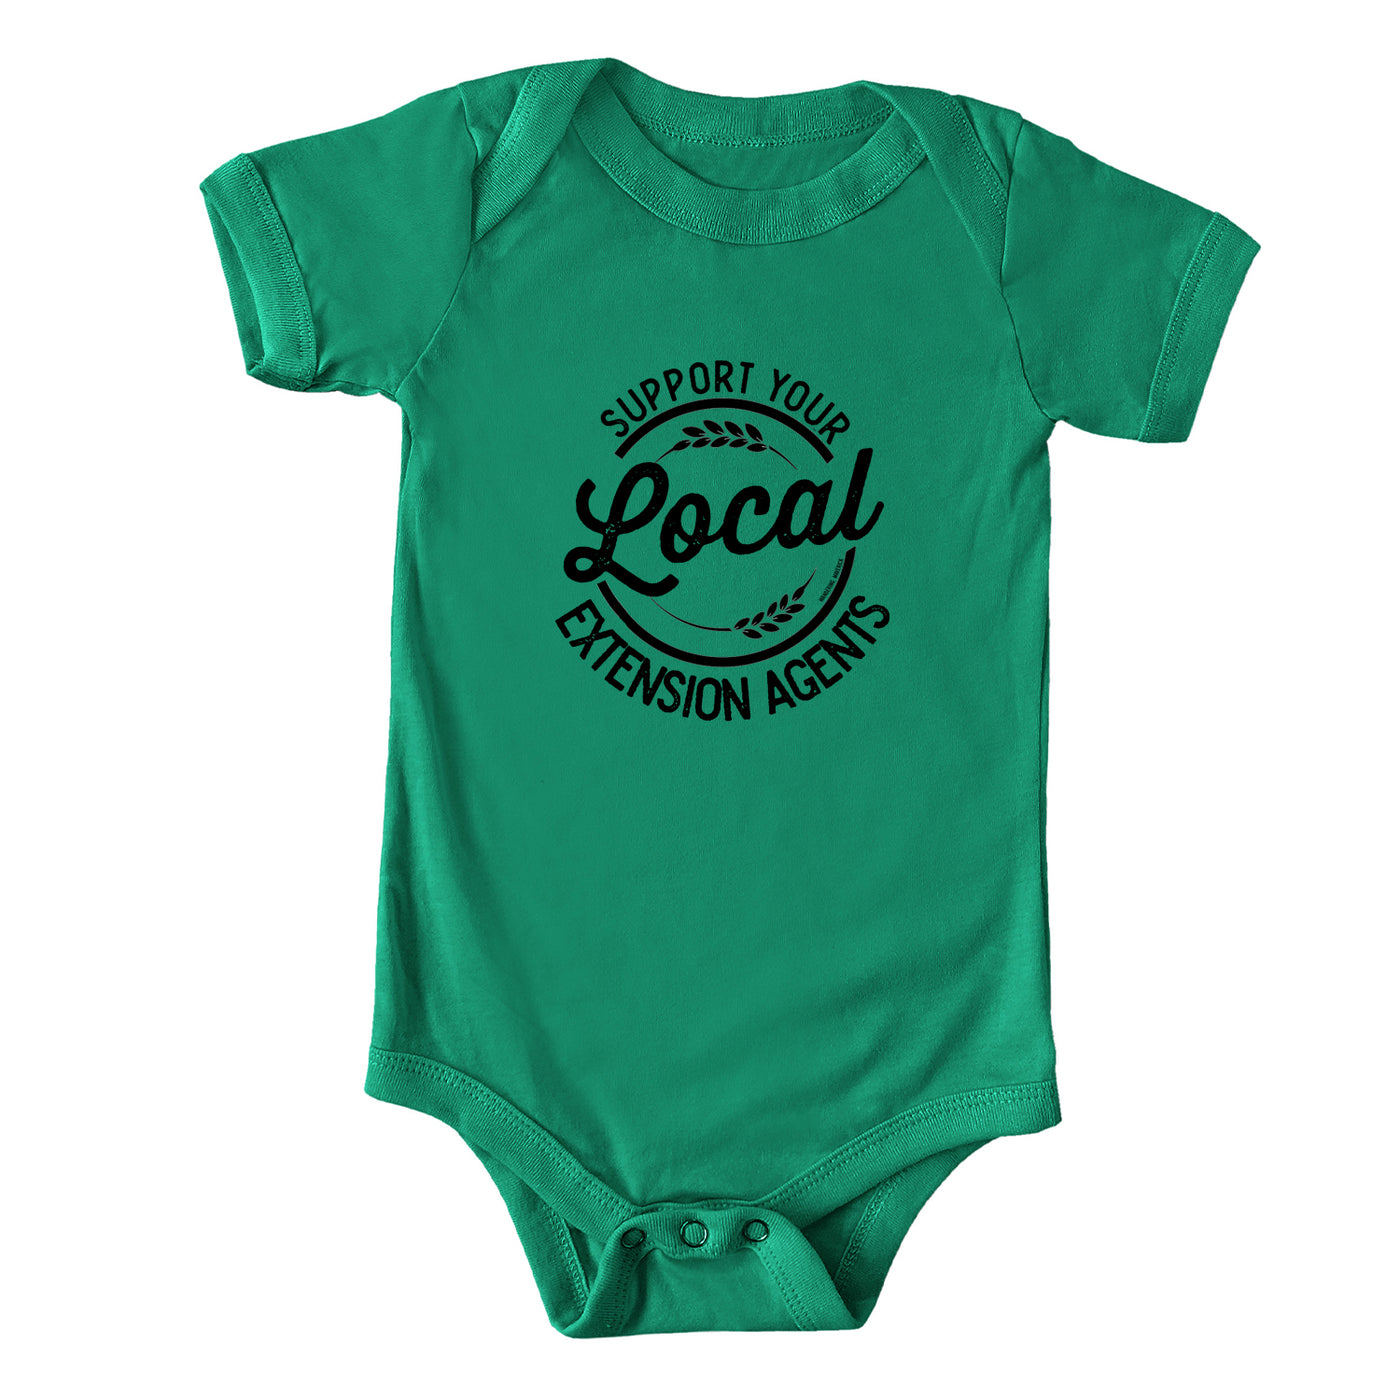 Support Your Local Extension Agents One Piece/T-Shirt (Newborn - Youth XL) - Multiple Colors!